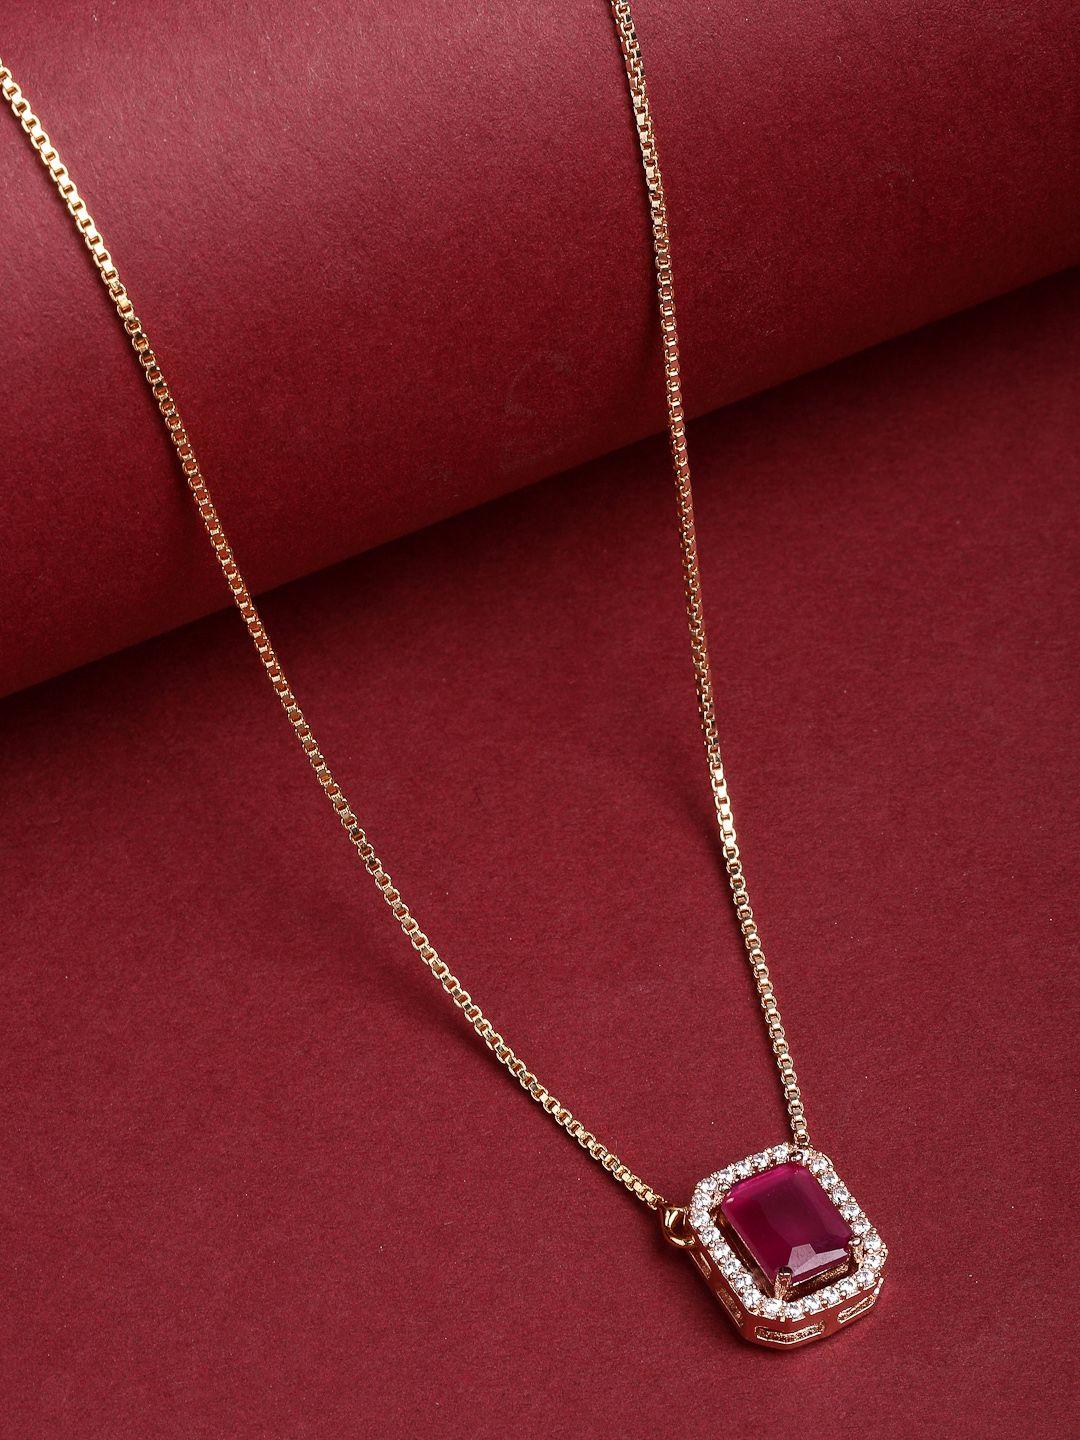 panash gold-plated red cz stone studded pendant with chain